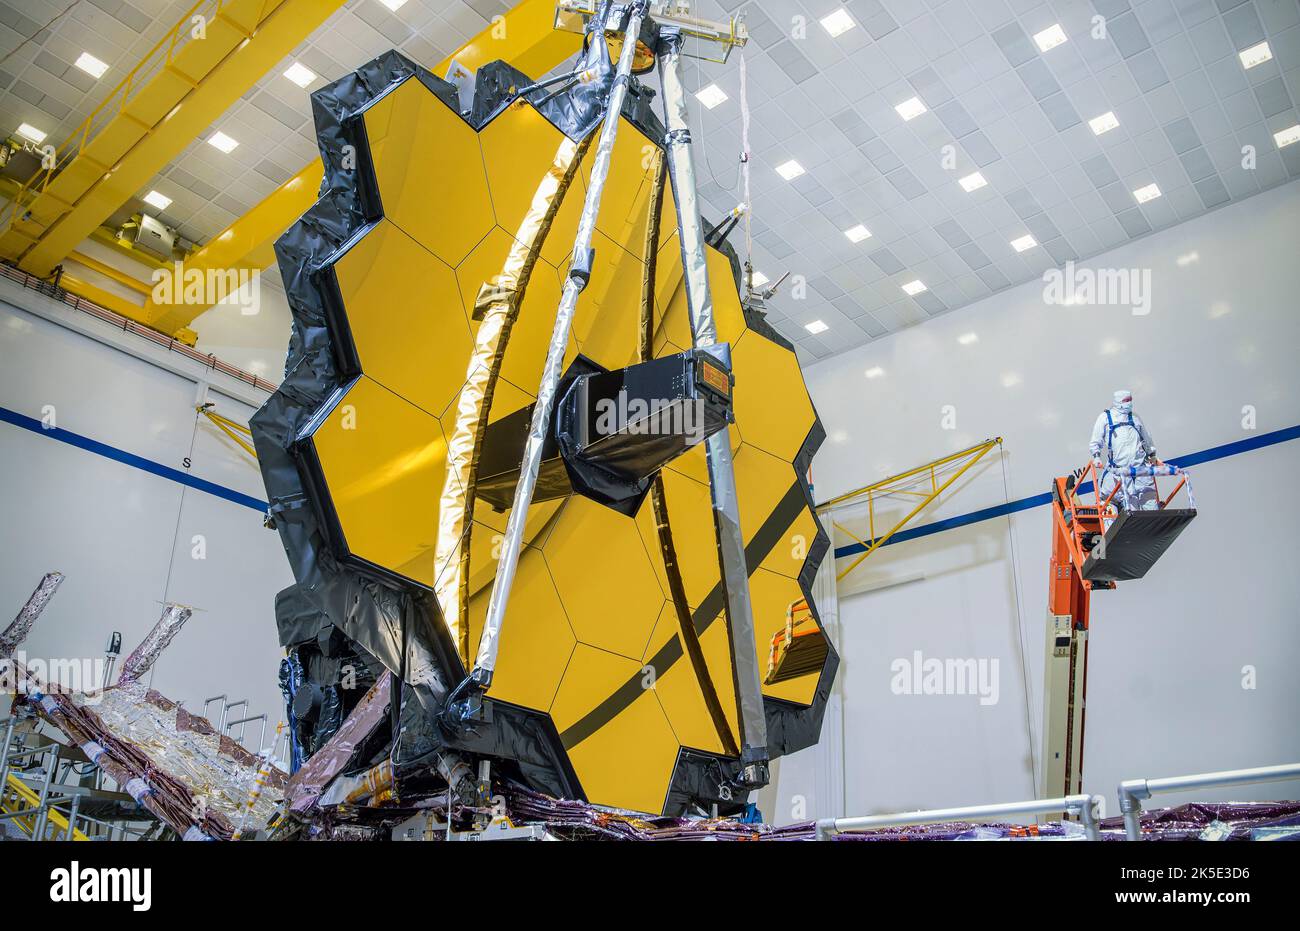 James Webb Space Telescope (JWST)'s Full Mirror Deployment Test. Webb has the largest mirror of its kind that NASA has ever built. In March 2020, testing teams deployed Webb's 21'4' (6.5m) primary mirror into the same configuration it will have when in space.Like the art of origami, Webb is a collection of movable parts that have been specifically designed to fold to a compact formation that is considerably smaller than when the observatory is fully deployed. An optimised version of a NASA image by experienced lead photographer Chris Gunn. Credit: NASA/Chris Gunn. For editorial use only Stock Photo